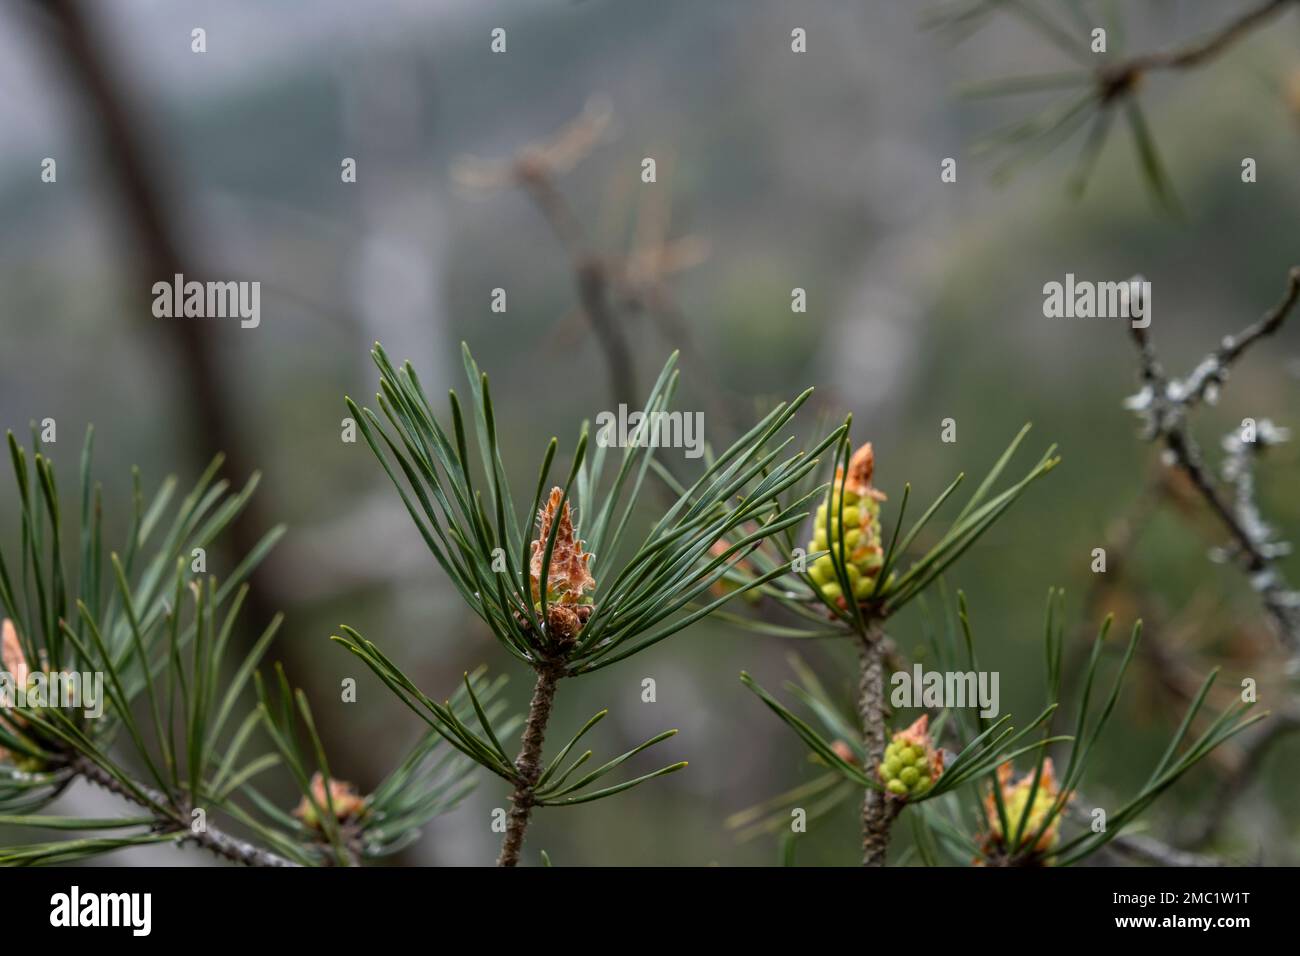 Scots pine (Pinus sylvestris) young seed cones and green leaves Stock Photo